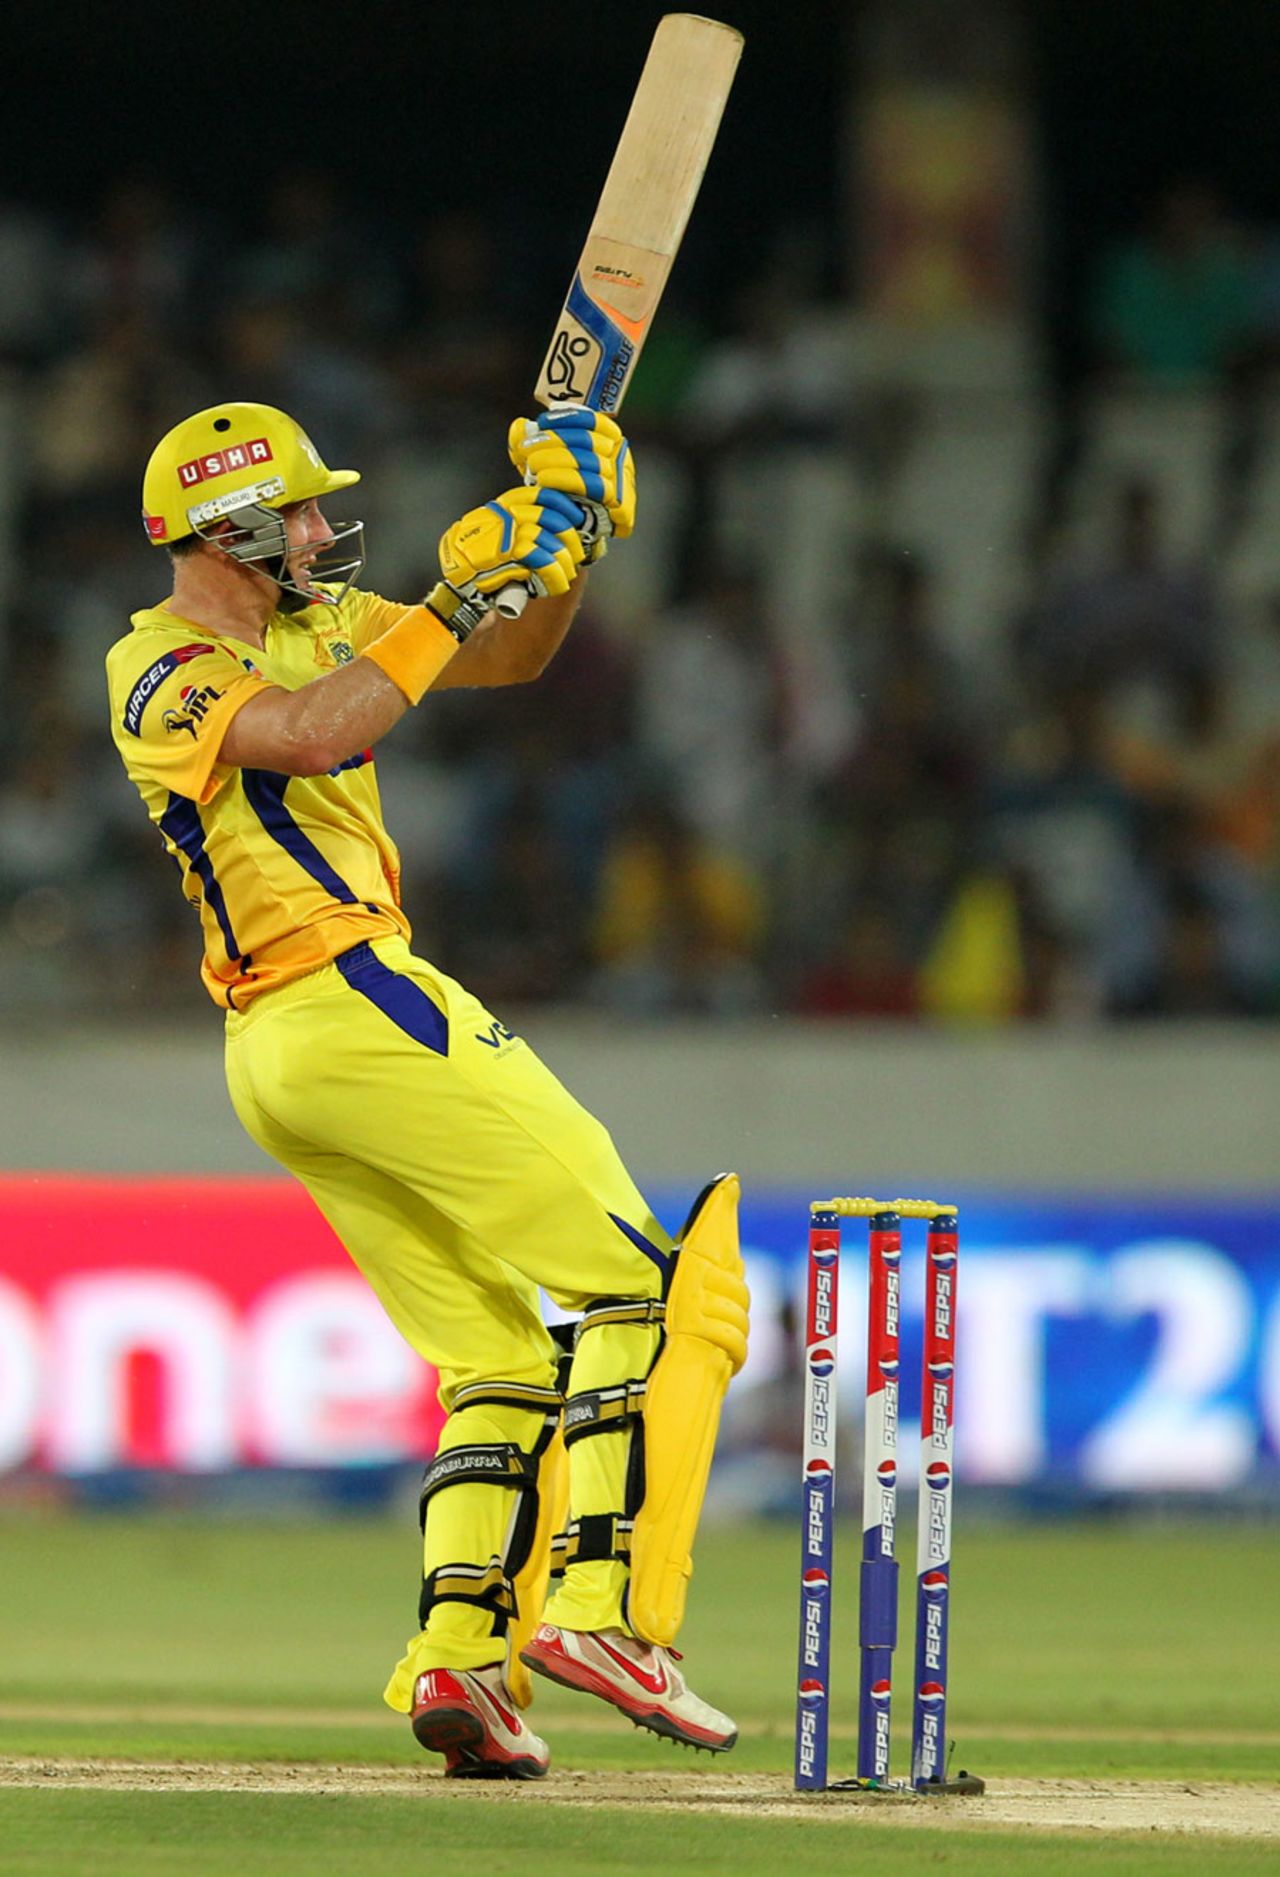 Michael Hussey swivels and plays a pull shot, Sunrisers Hyderabad v Chennai Super Kings, IPL 2013, Hyderabad, May 8, 2013